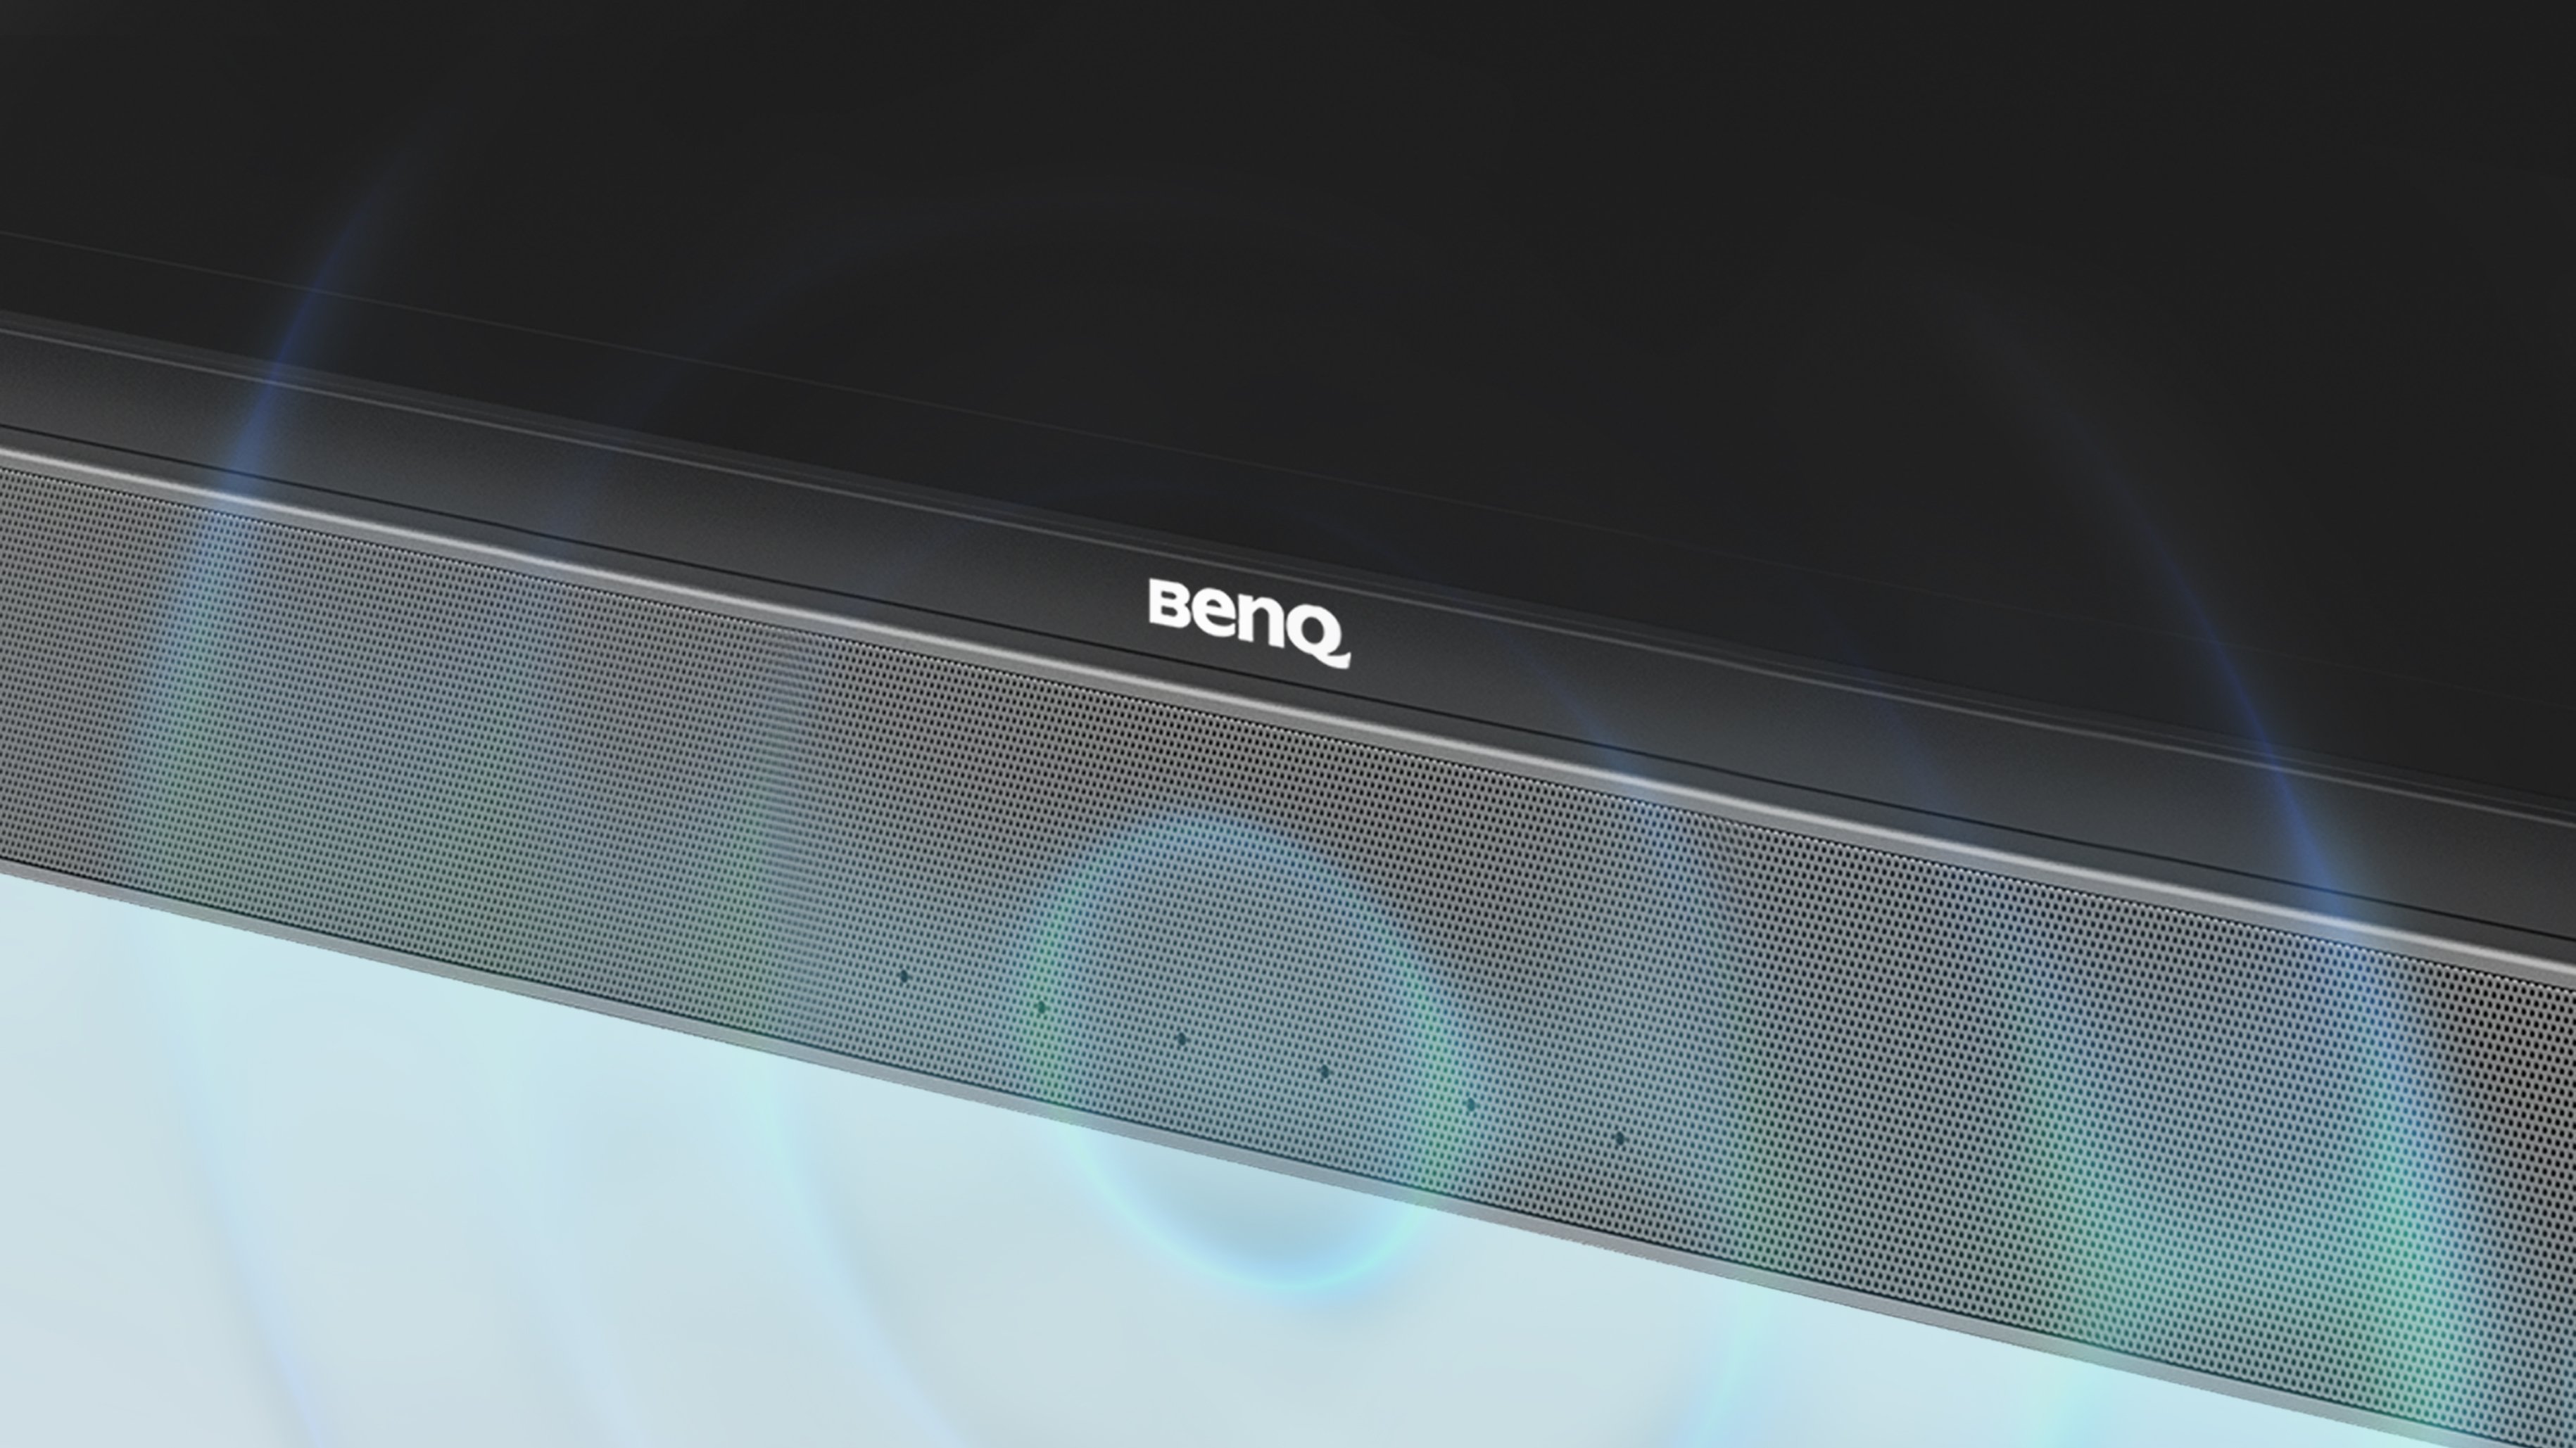 BenQ interactive display come with 6 built-in microphones with echo cancellation and noise reduction